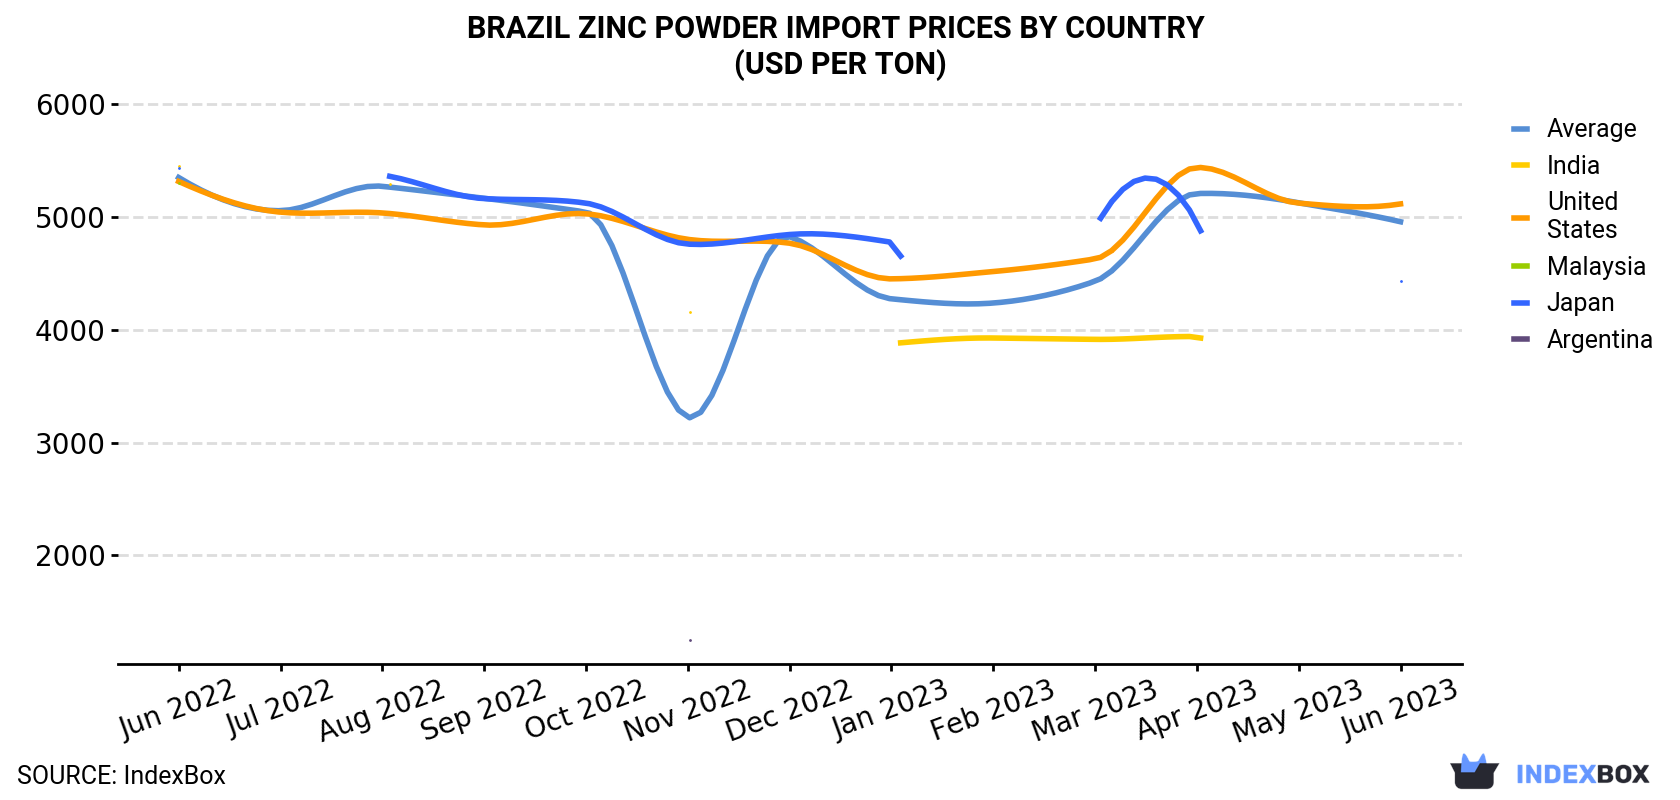 Brazil Zinc Powder Import Prices By Country (USD Per Ton)